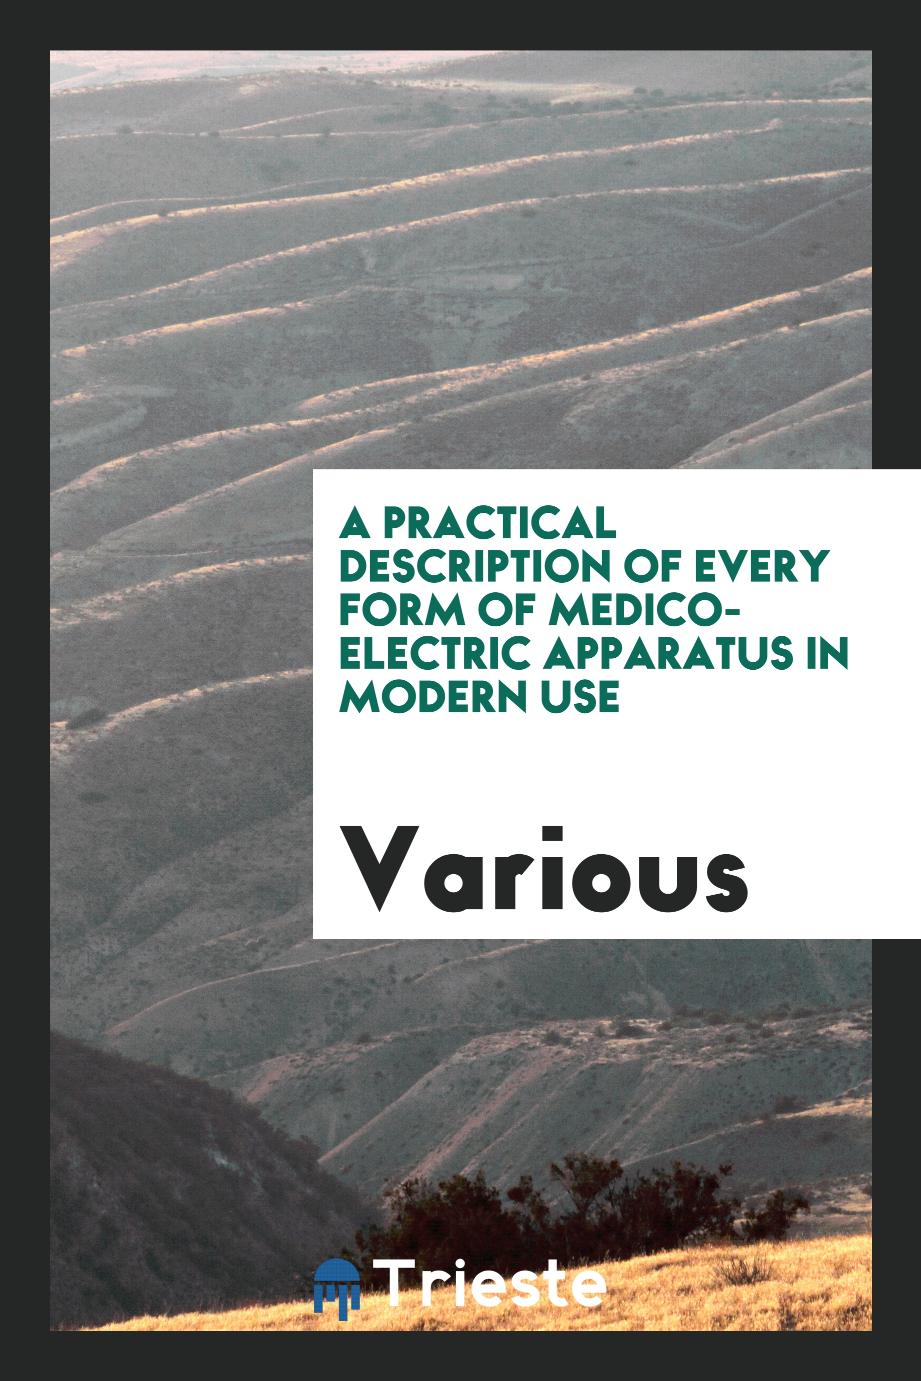 A Practical Description of Every Form of Medico-Electric Apparatus in Modern Use